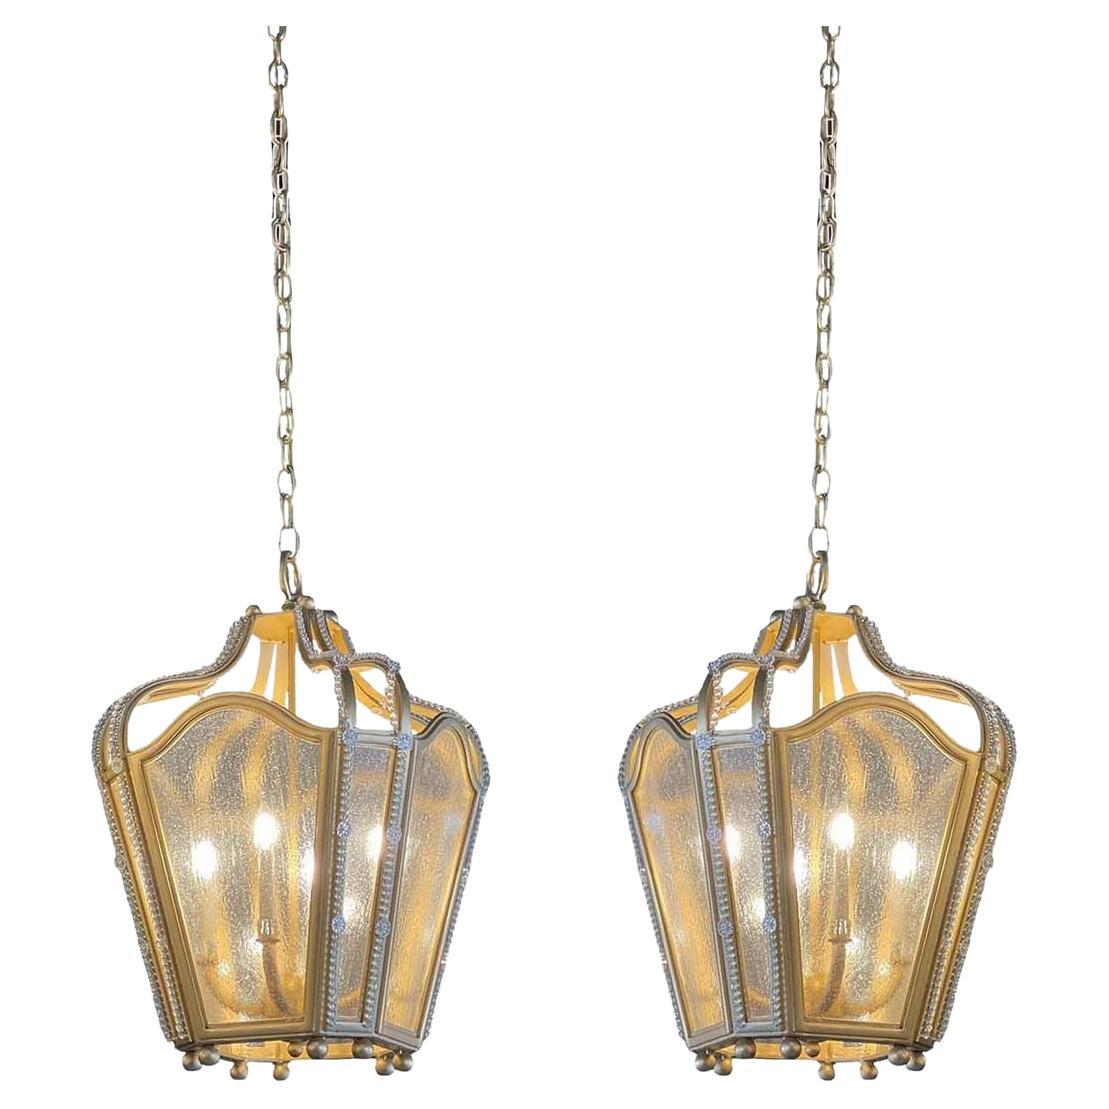 Pair of Gold Finished Wrought Iron Lanterns with Textured Glass and Glass Beads For Sale